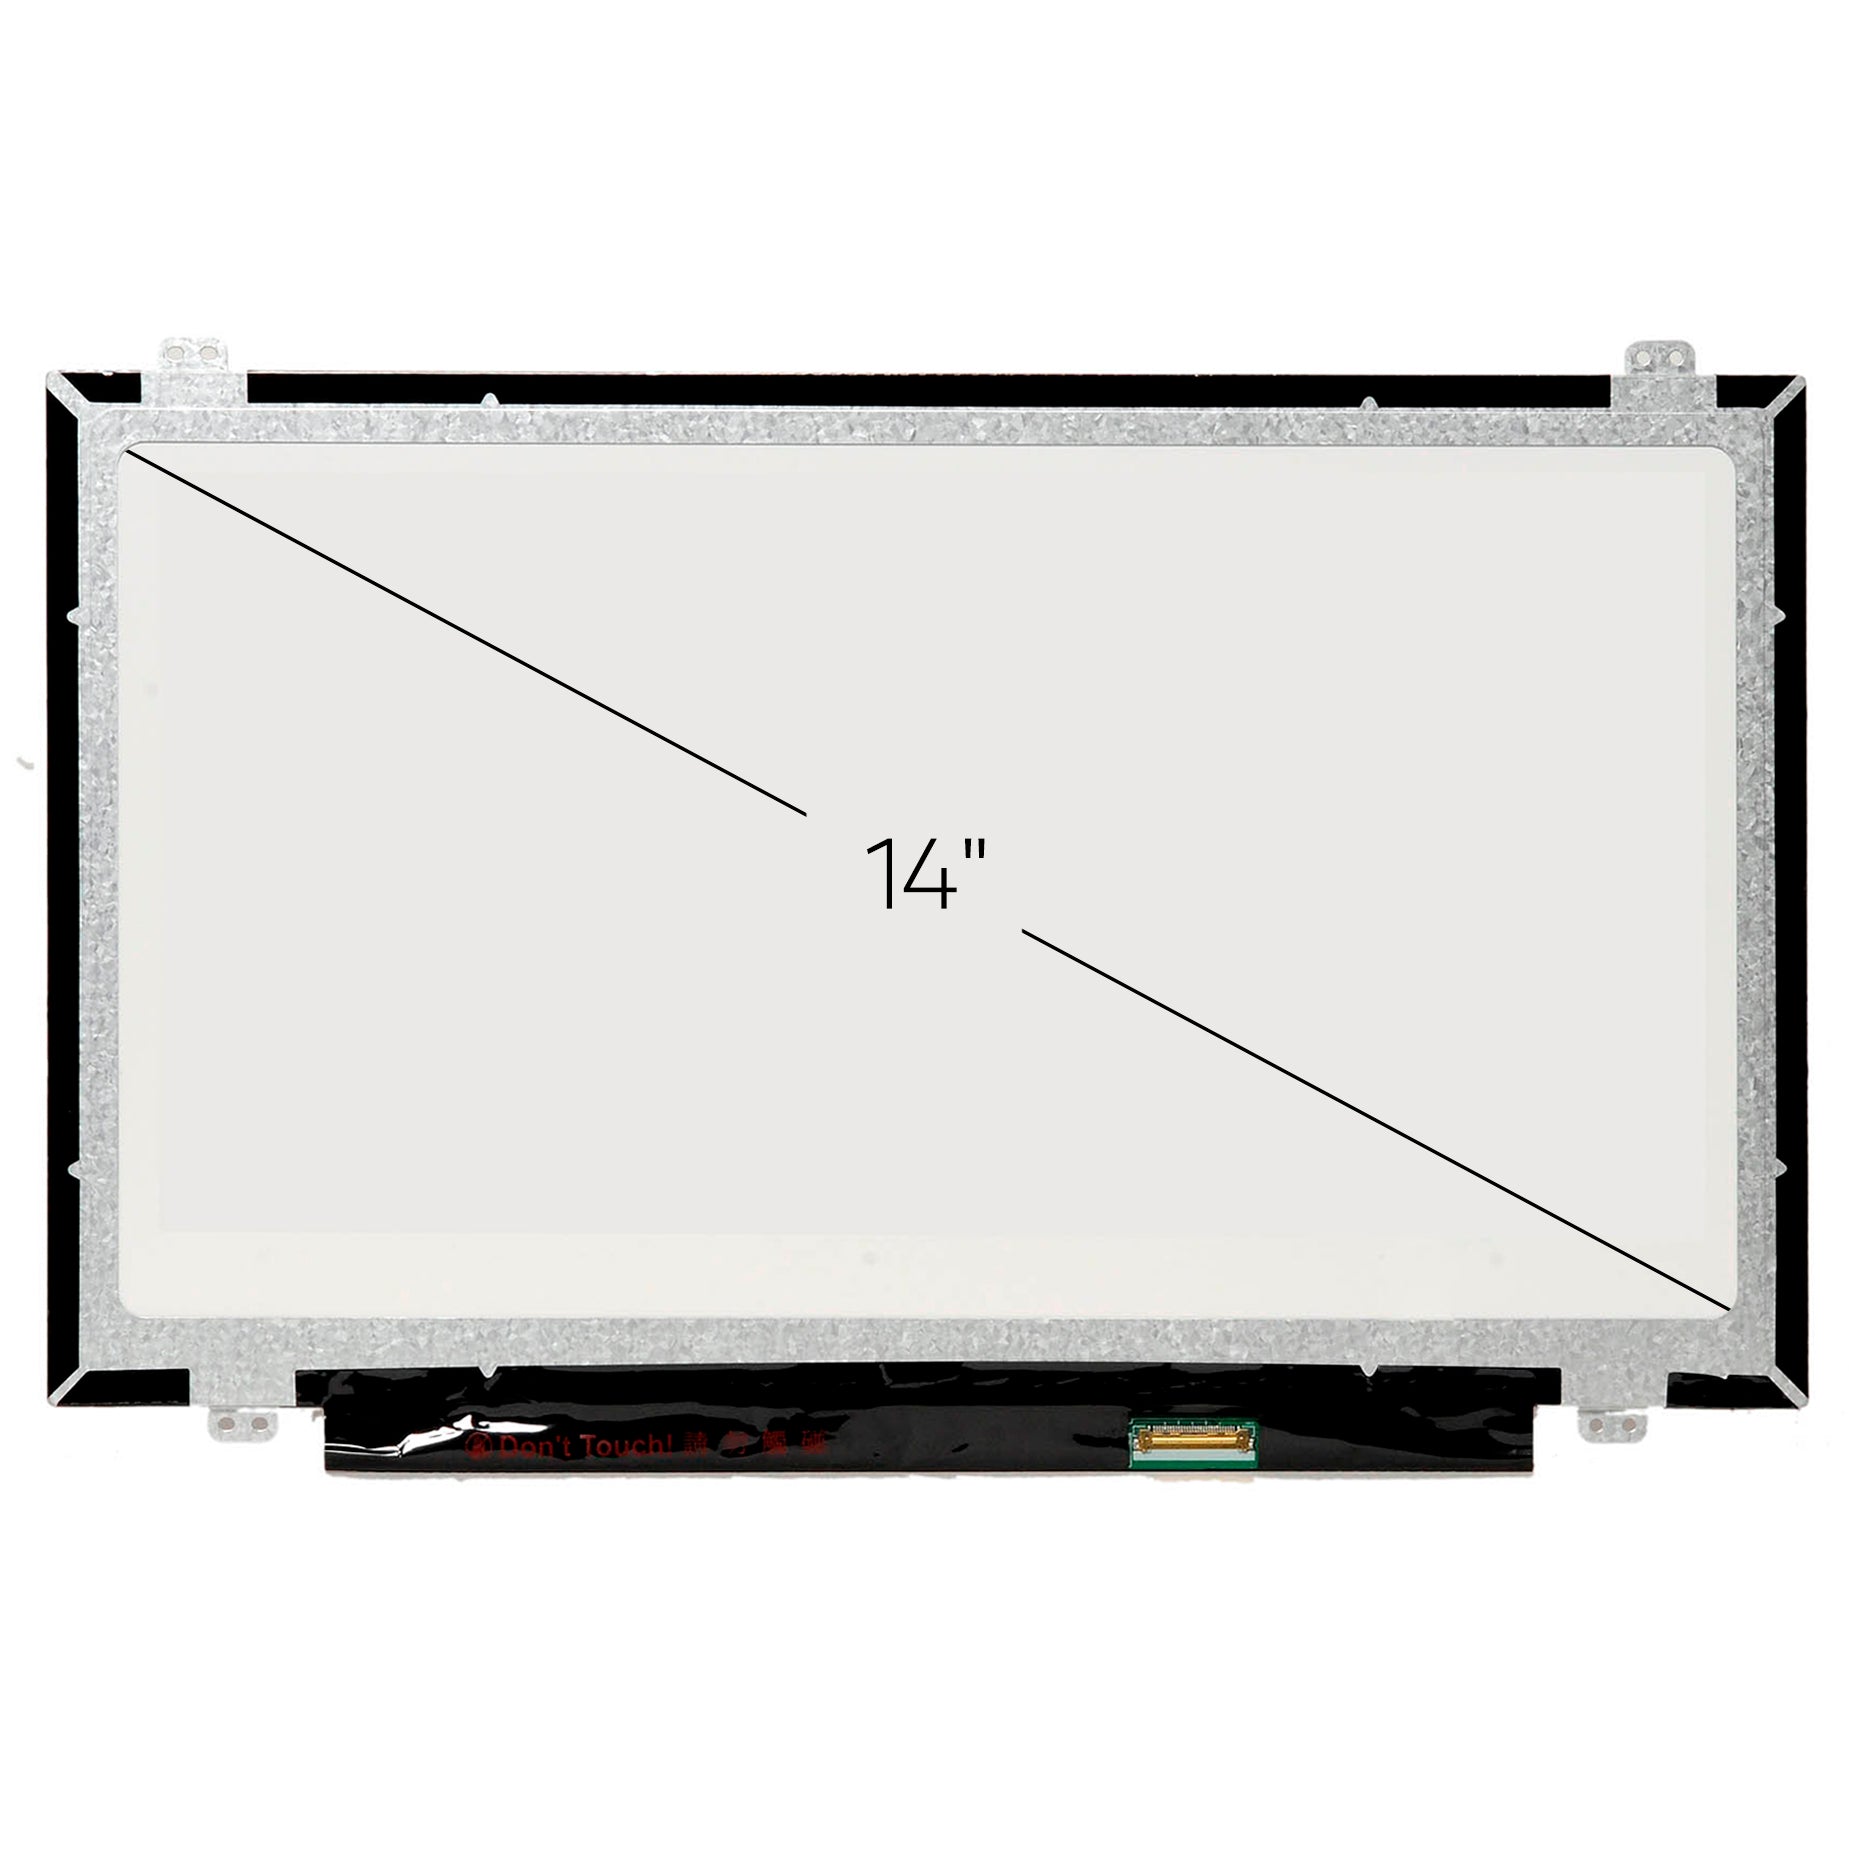 Screen Replacement for LTN140AT35-H01 HD 1366x768 Glossy LCD LED Display